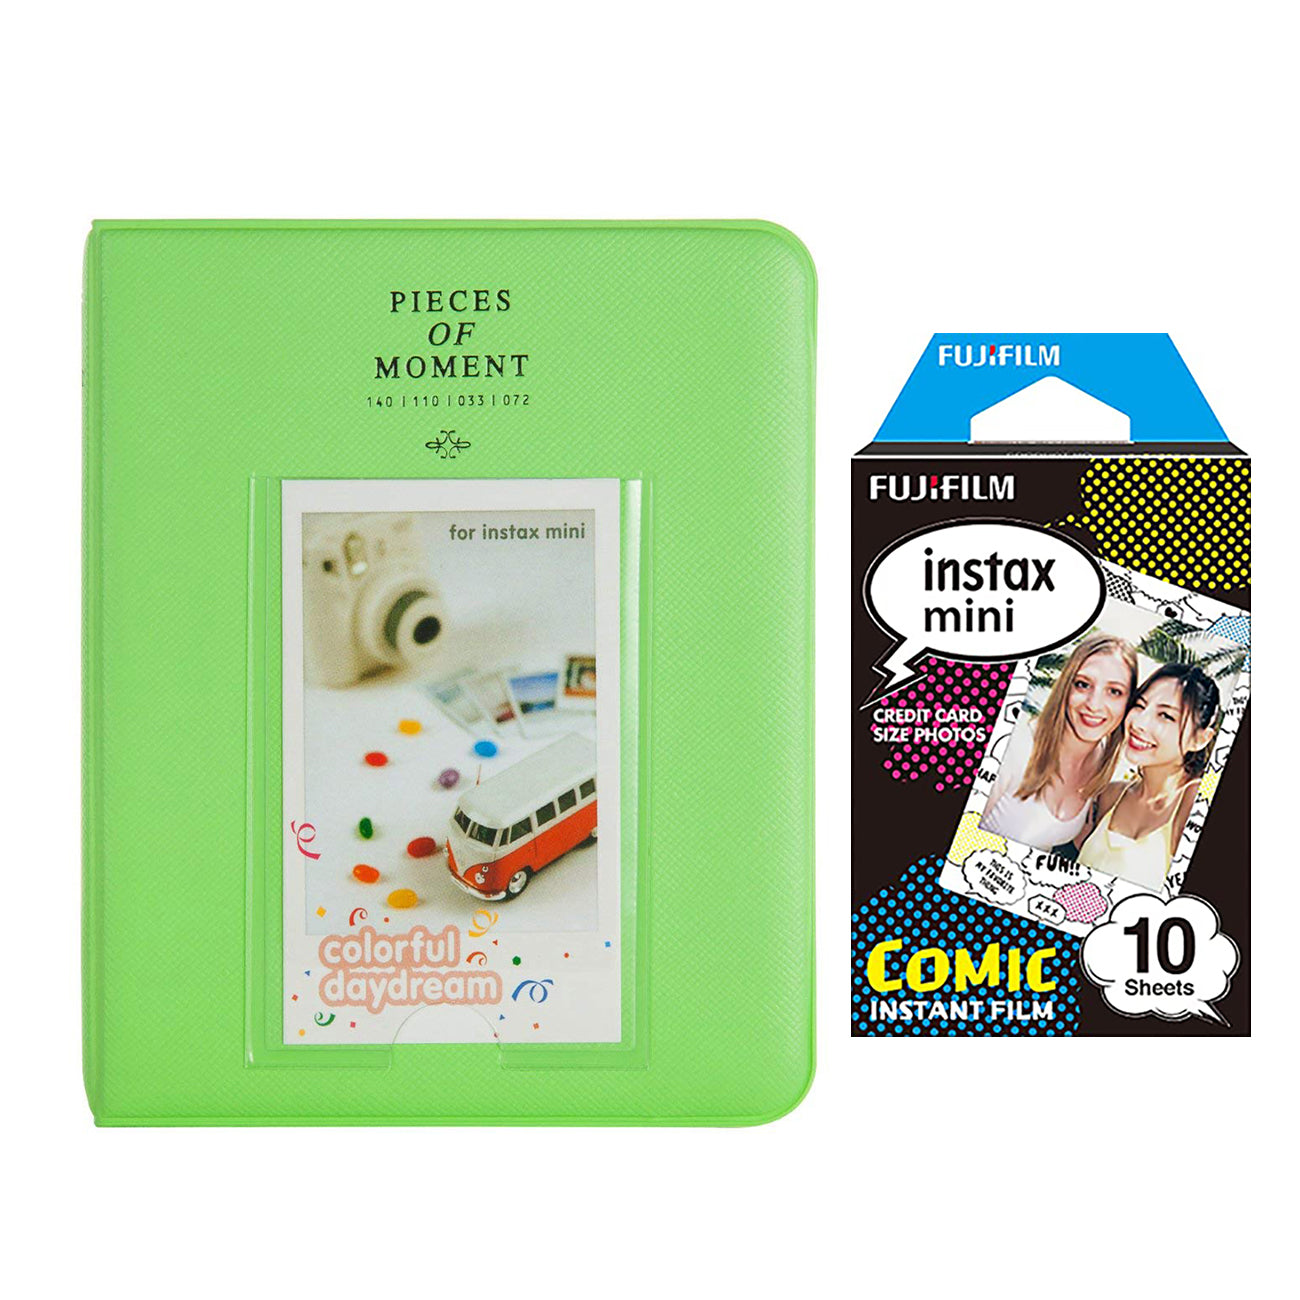 Fujifilm Instax Mini 10X1 comic Instant Film with Instax Time Photo Album 64 Sheets (LIME GREEN)